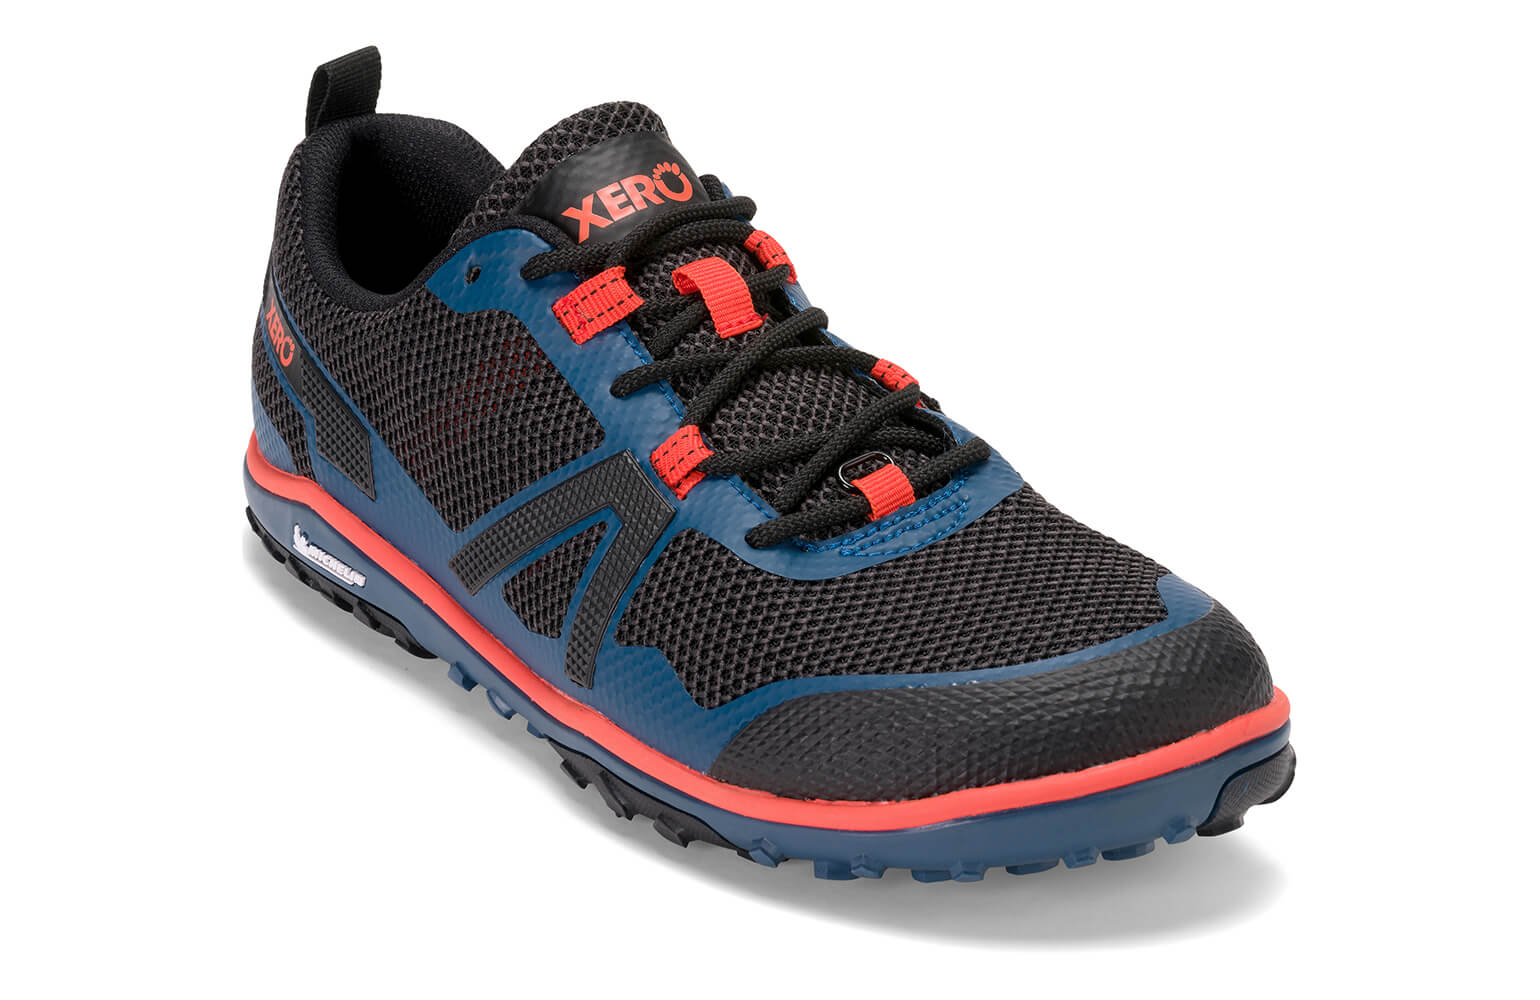 Xero Shoes Colorado MenMinimalist shoes for on road and light trail